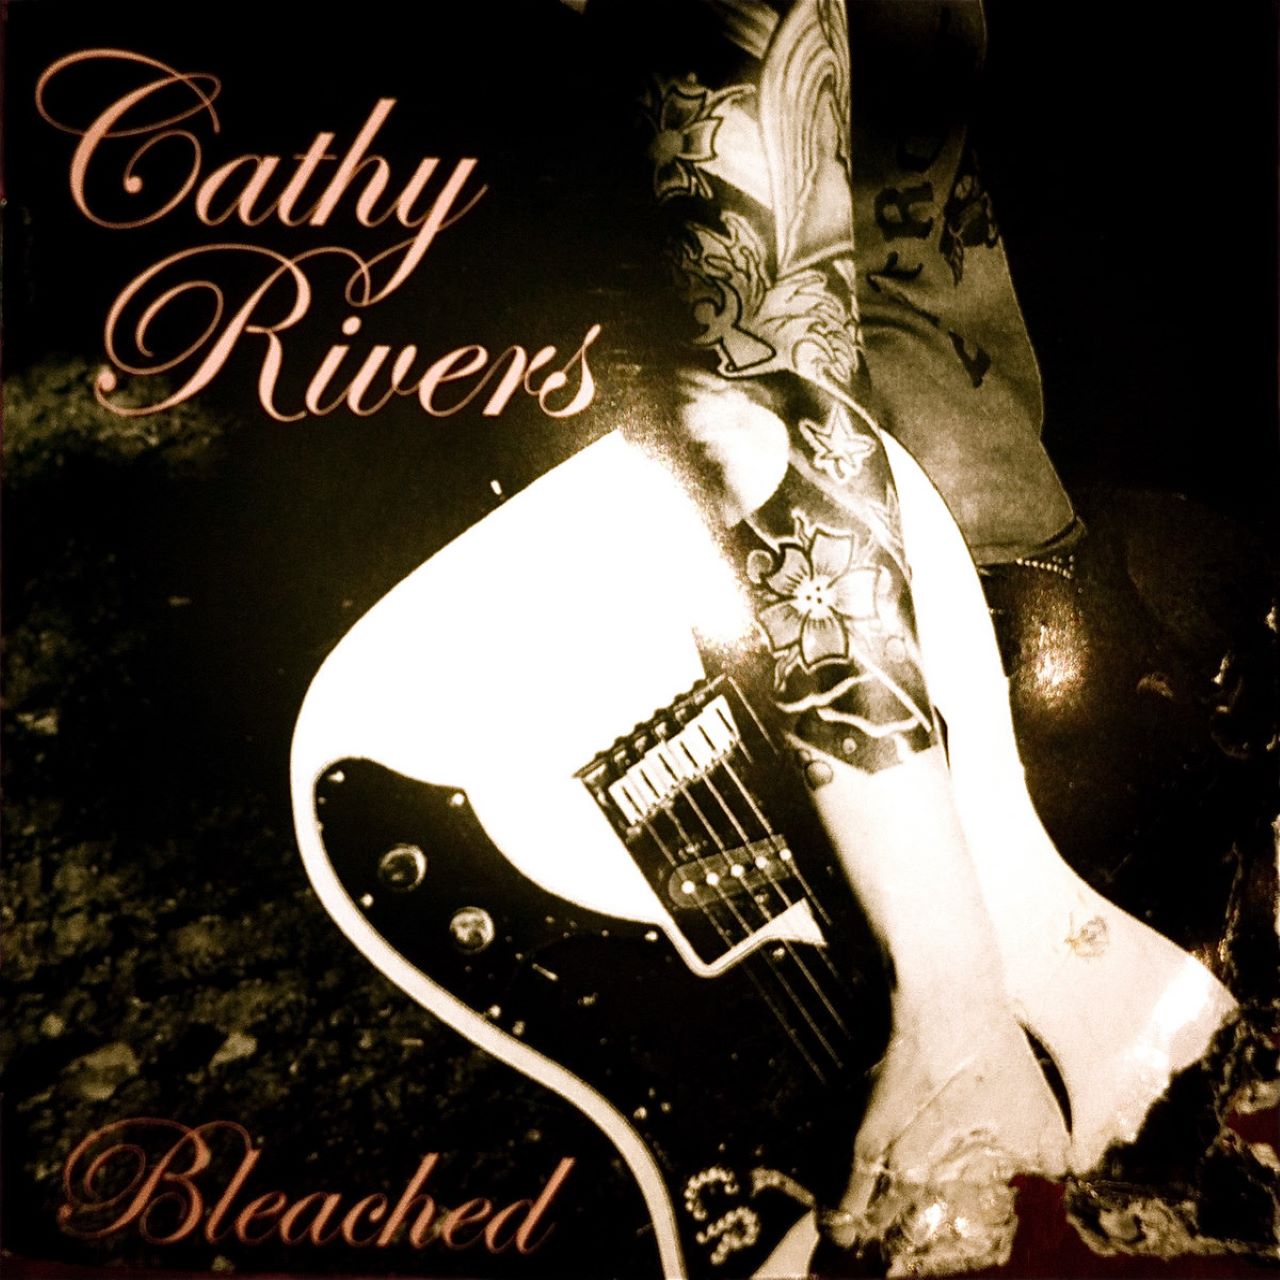 Cathy Rivers - Bleached cover album